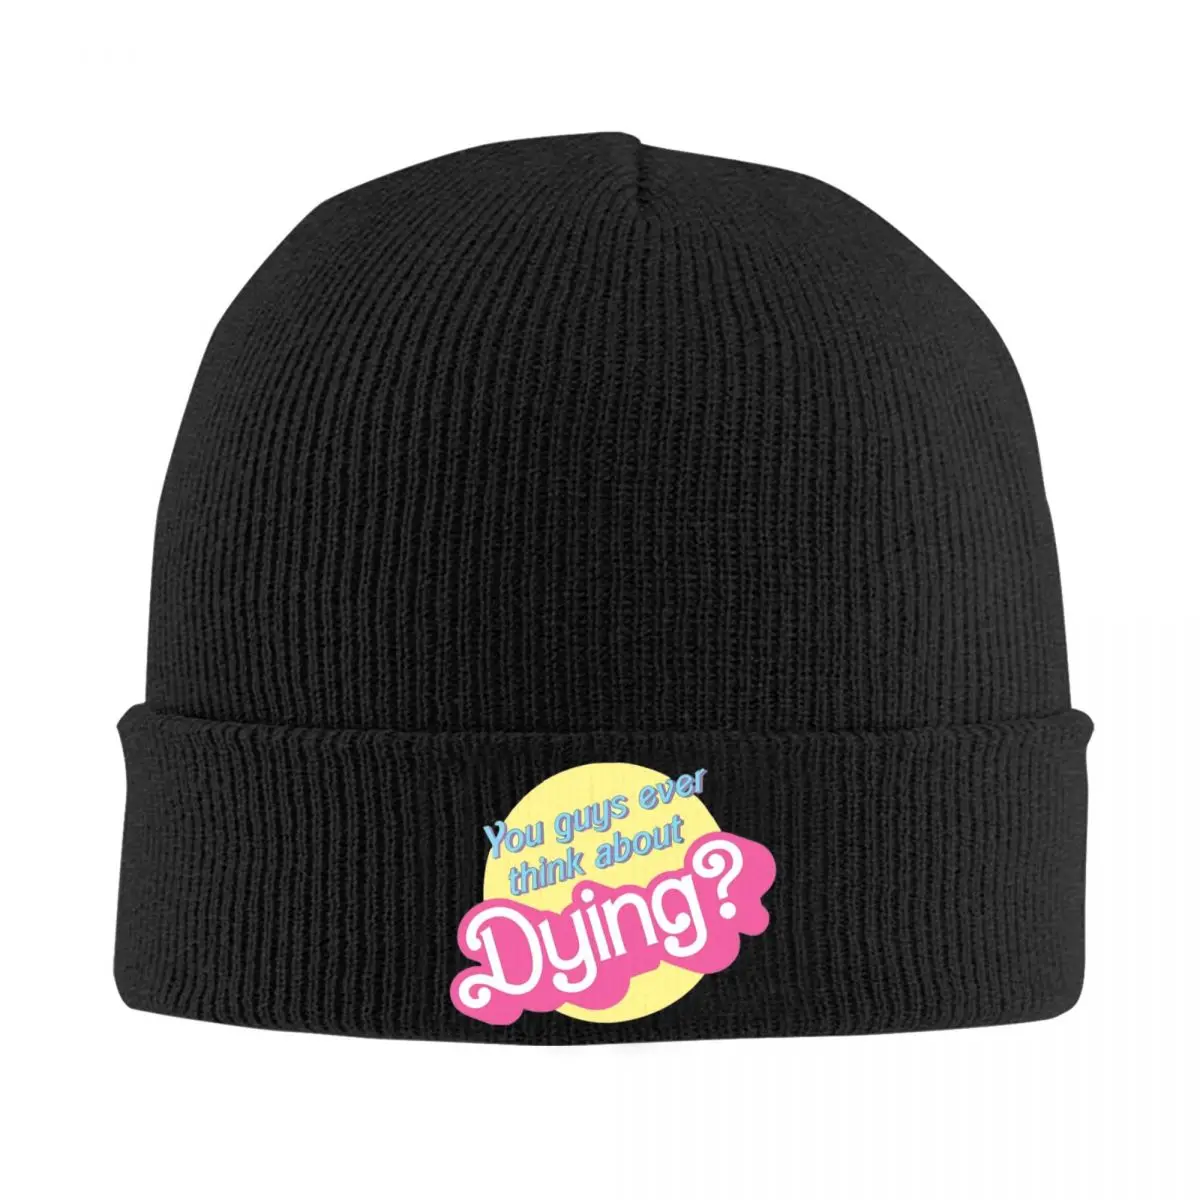 

Do You Guys Ever Think About Dying Kenough Knitted Caps for Women Men Beanie Autumn Winter Hat Warm Cap